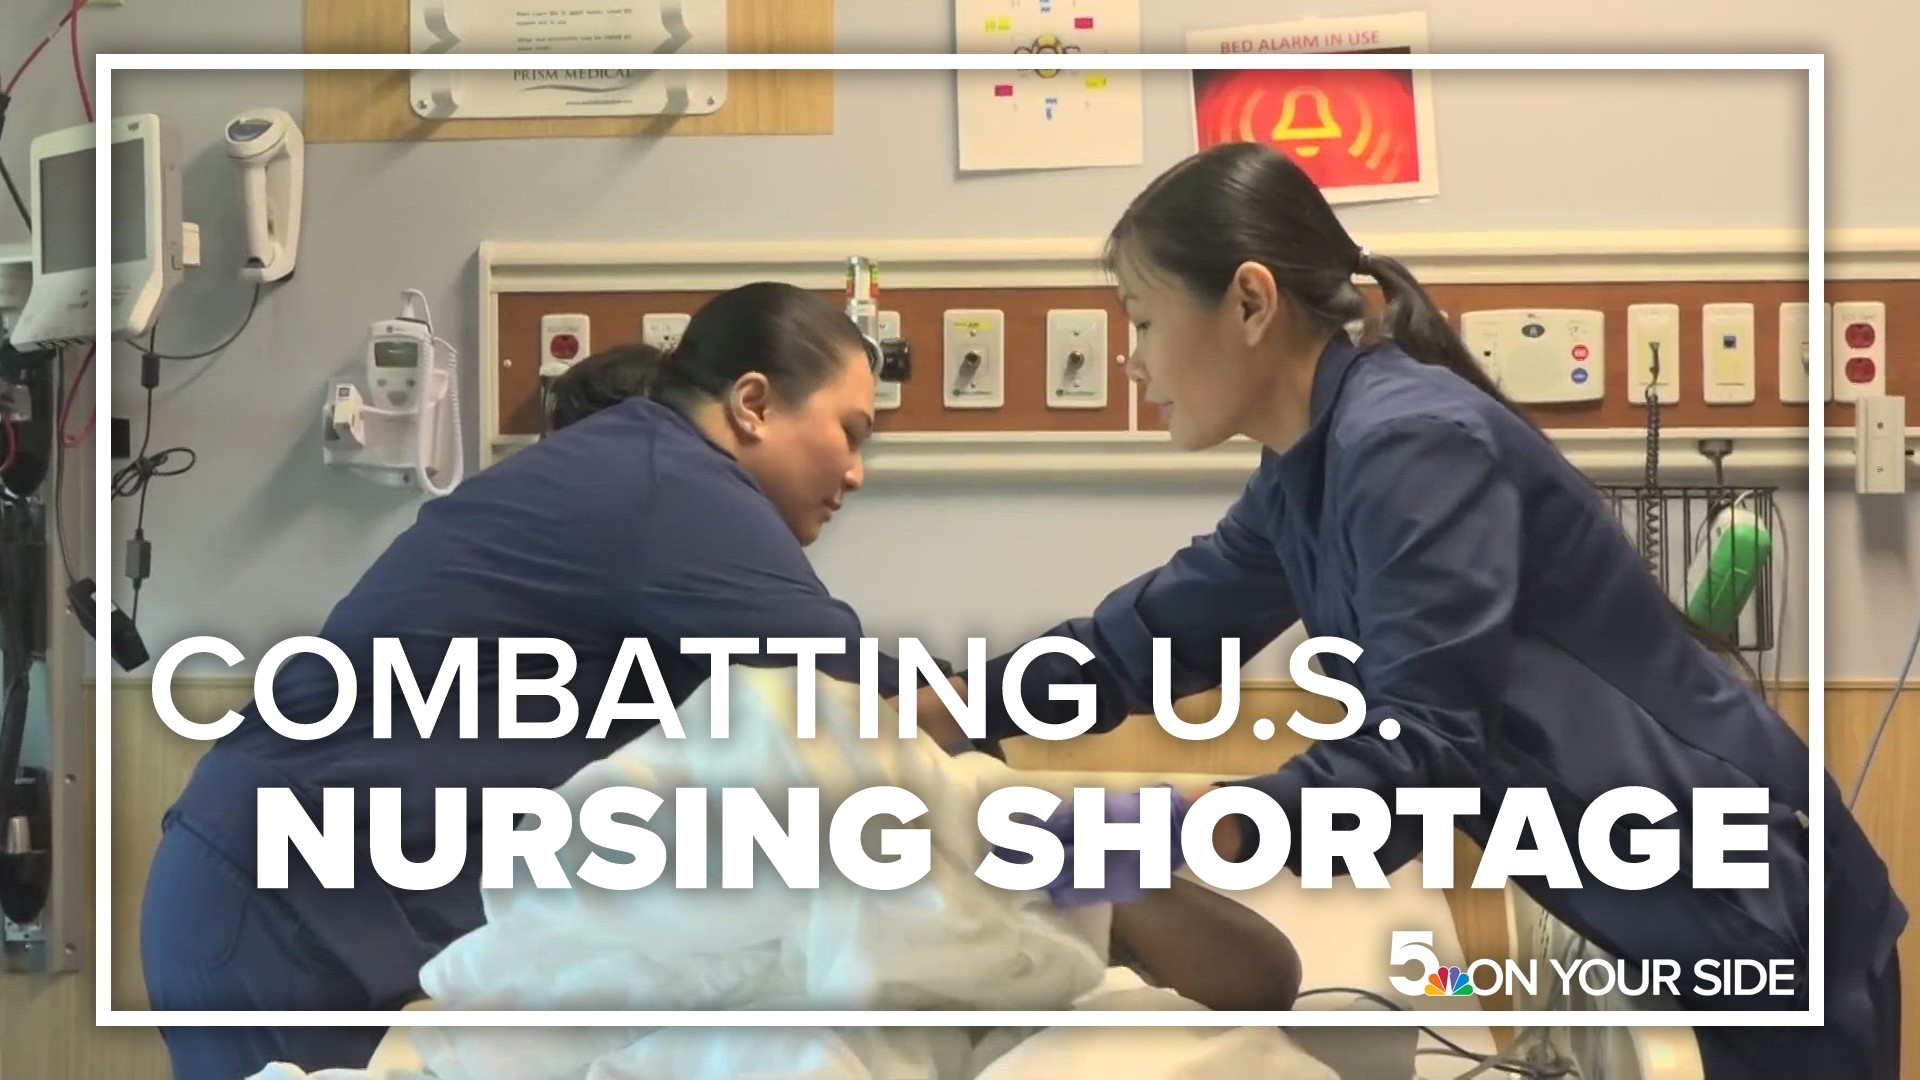 Christian Hospital has contracted with 56 international nurses since 2018. At least 15 of them have converted to full-time employment.